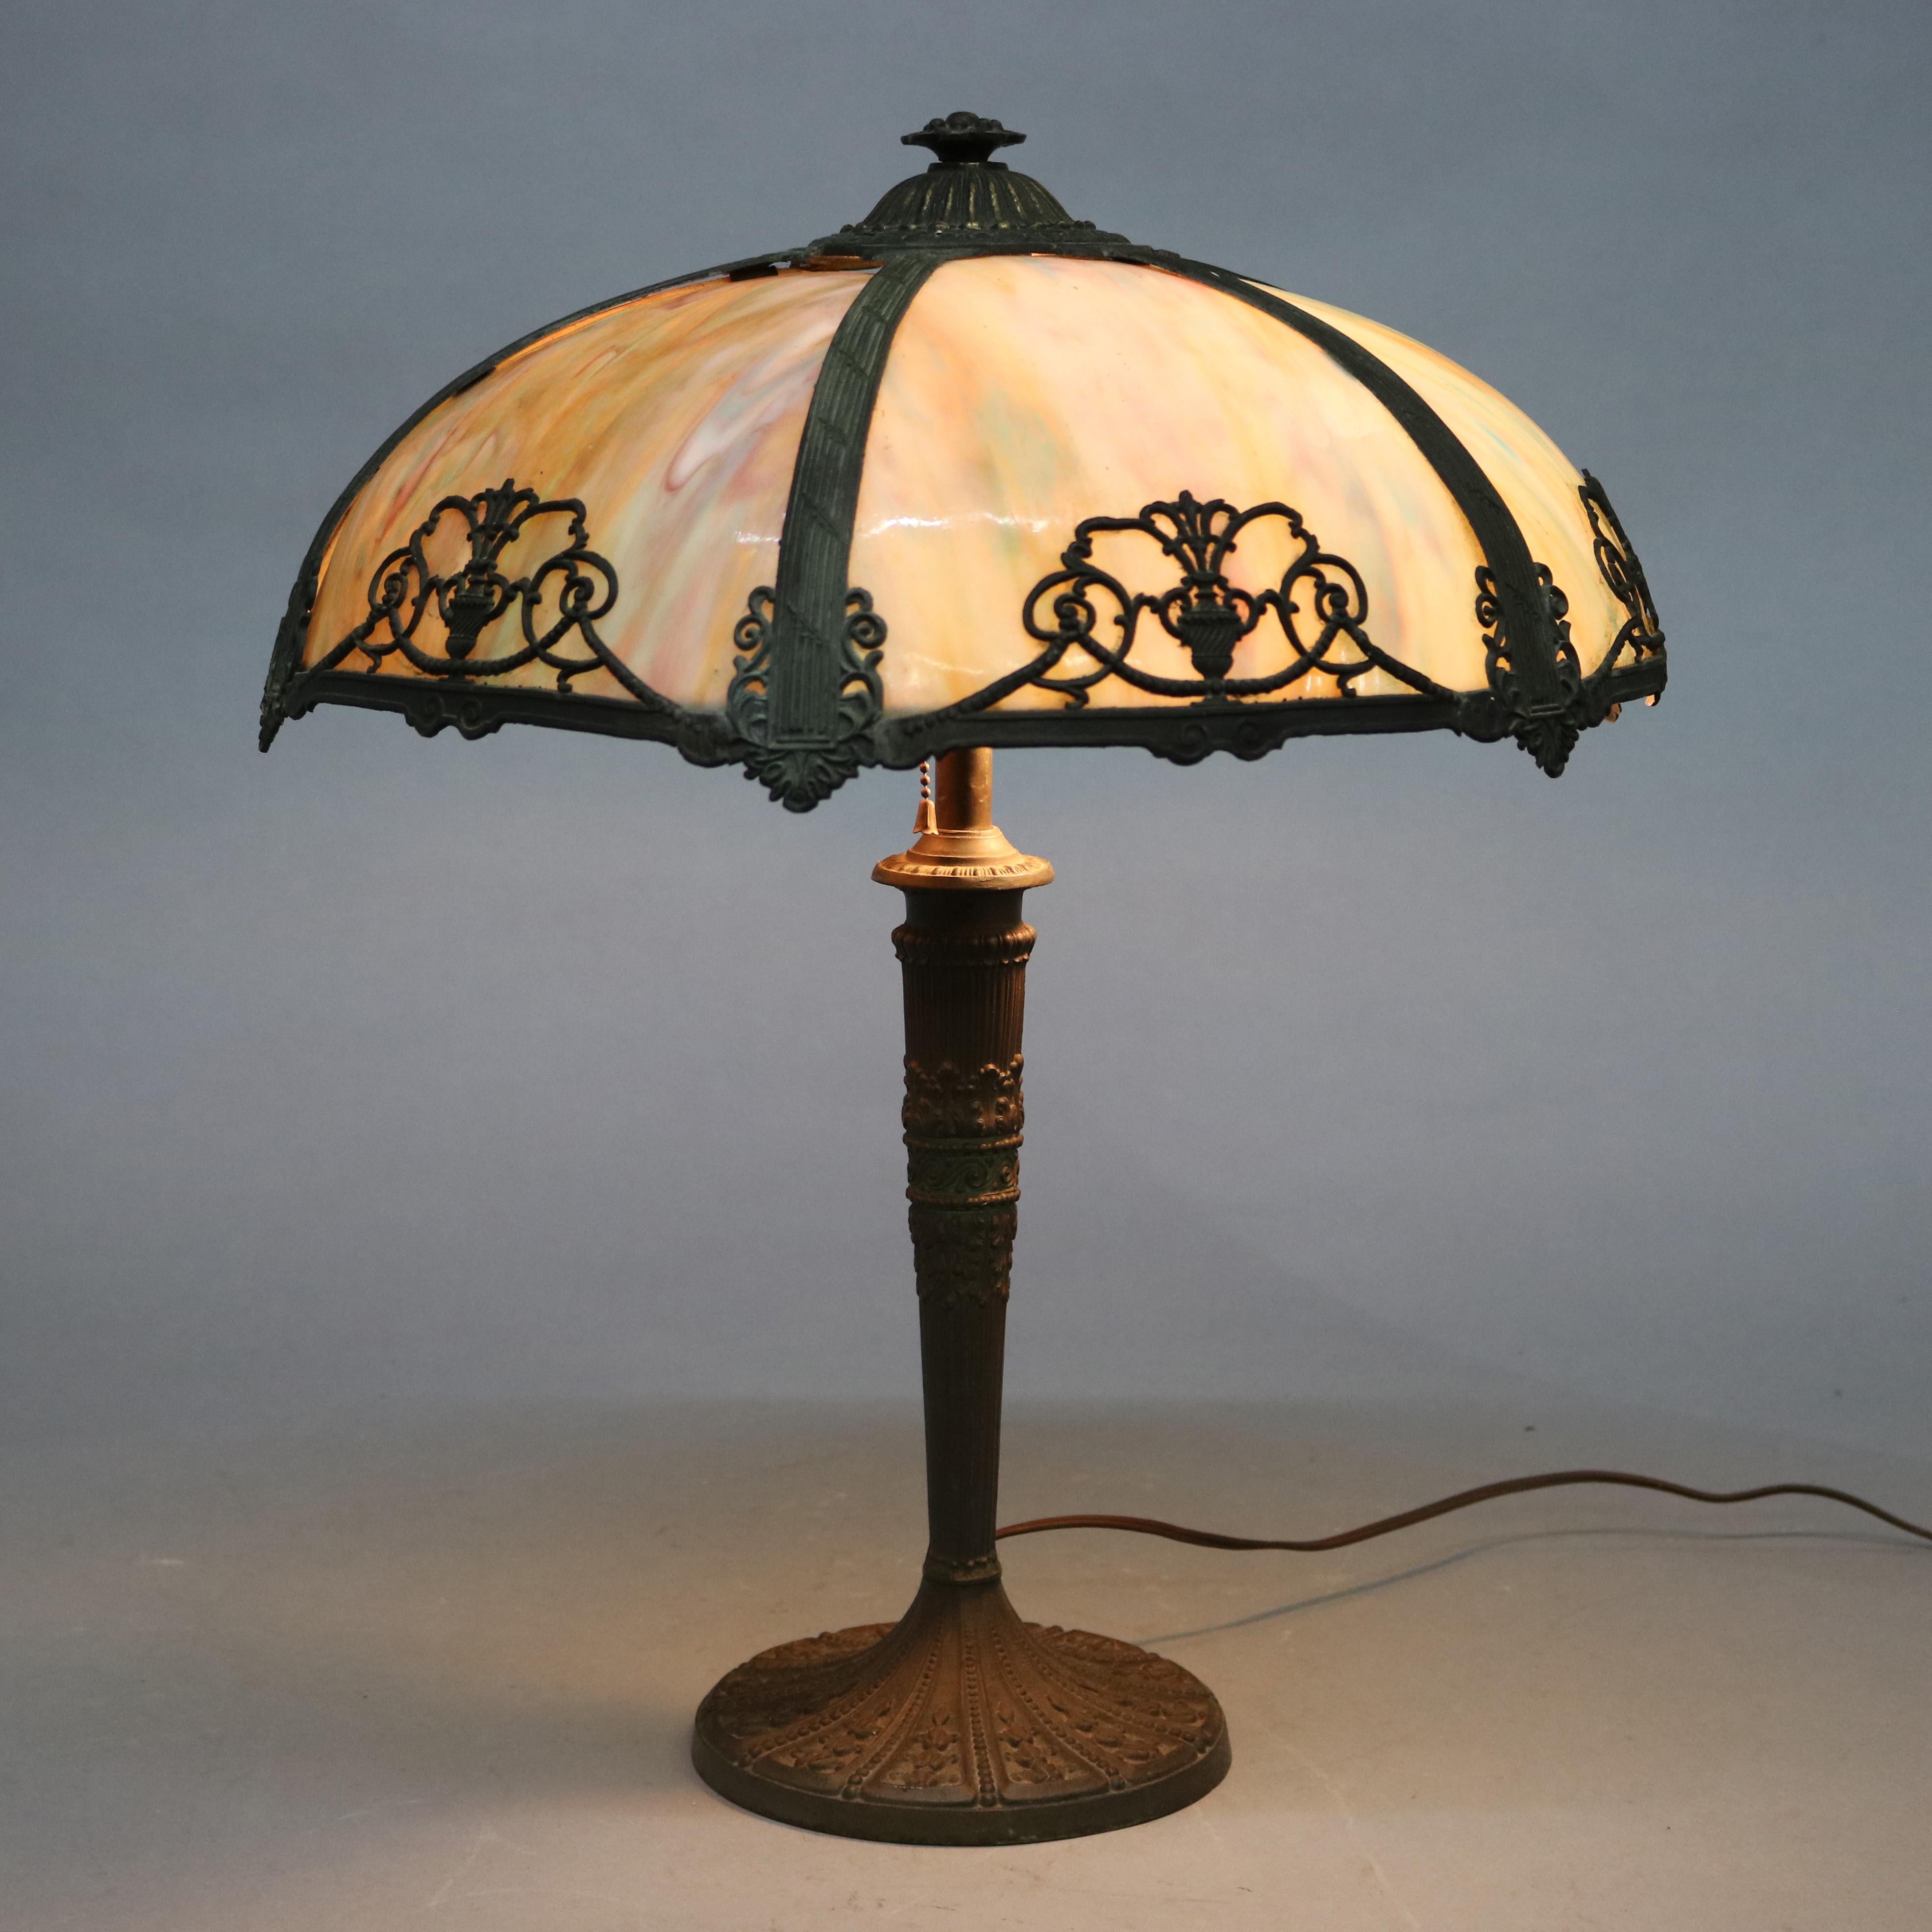 An Arts & Crafts table lamp in the manner of Bradley and Hubbard offers cast frame with urn and foliate elements and housing bent slag glass surmounting double socket base, circa 1920.

Measures: 22